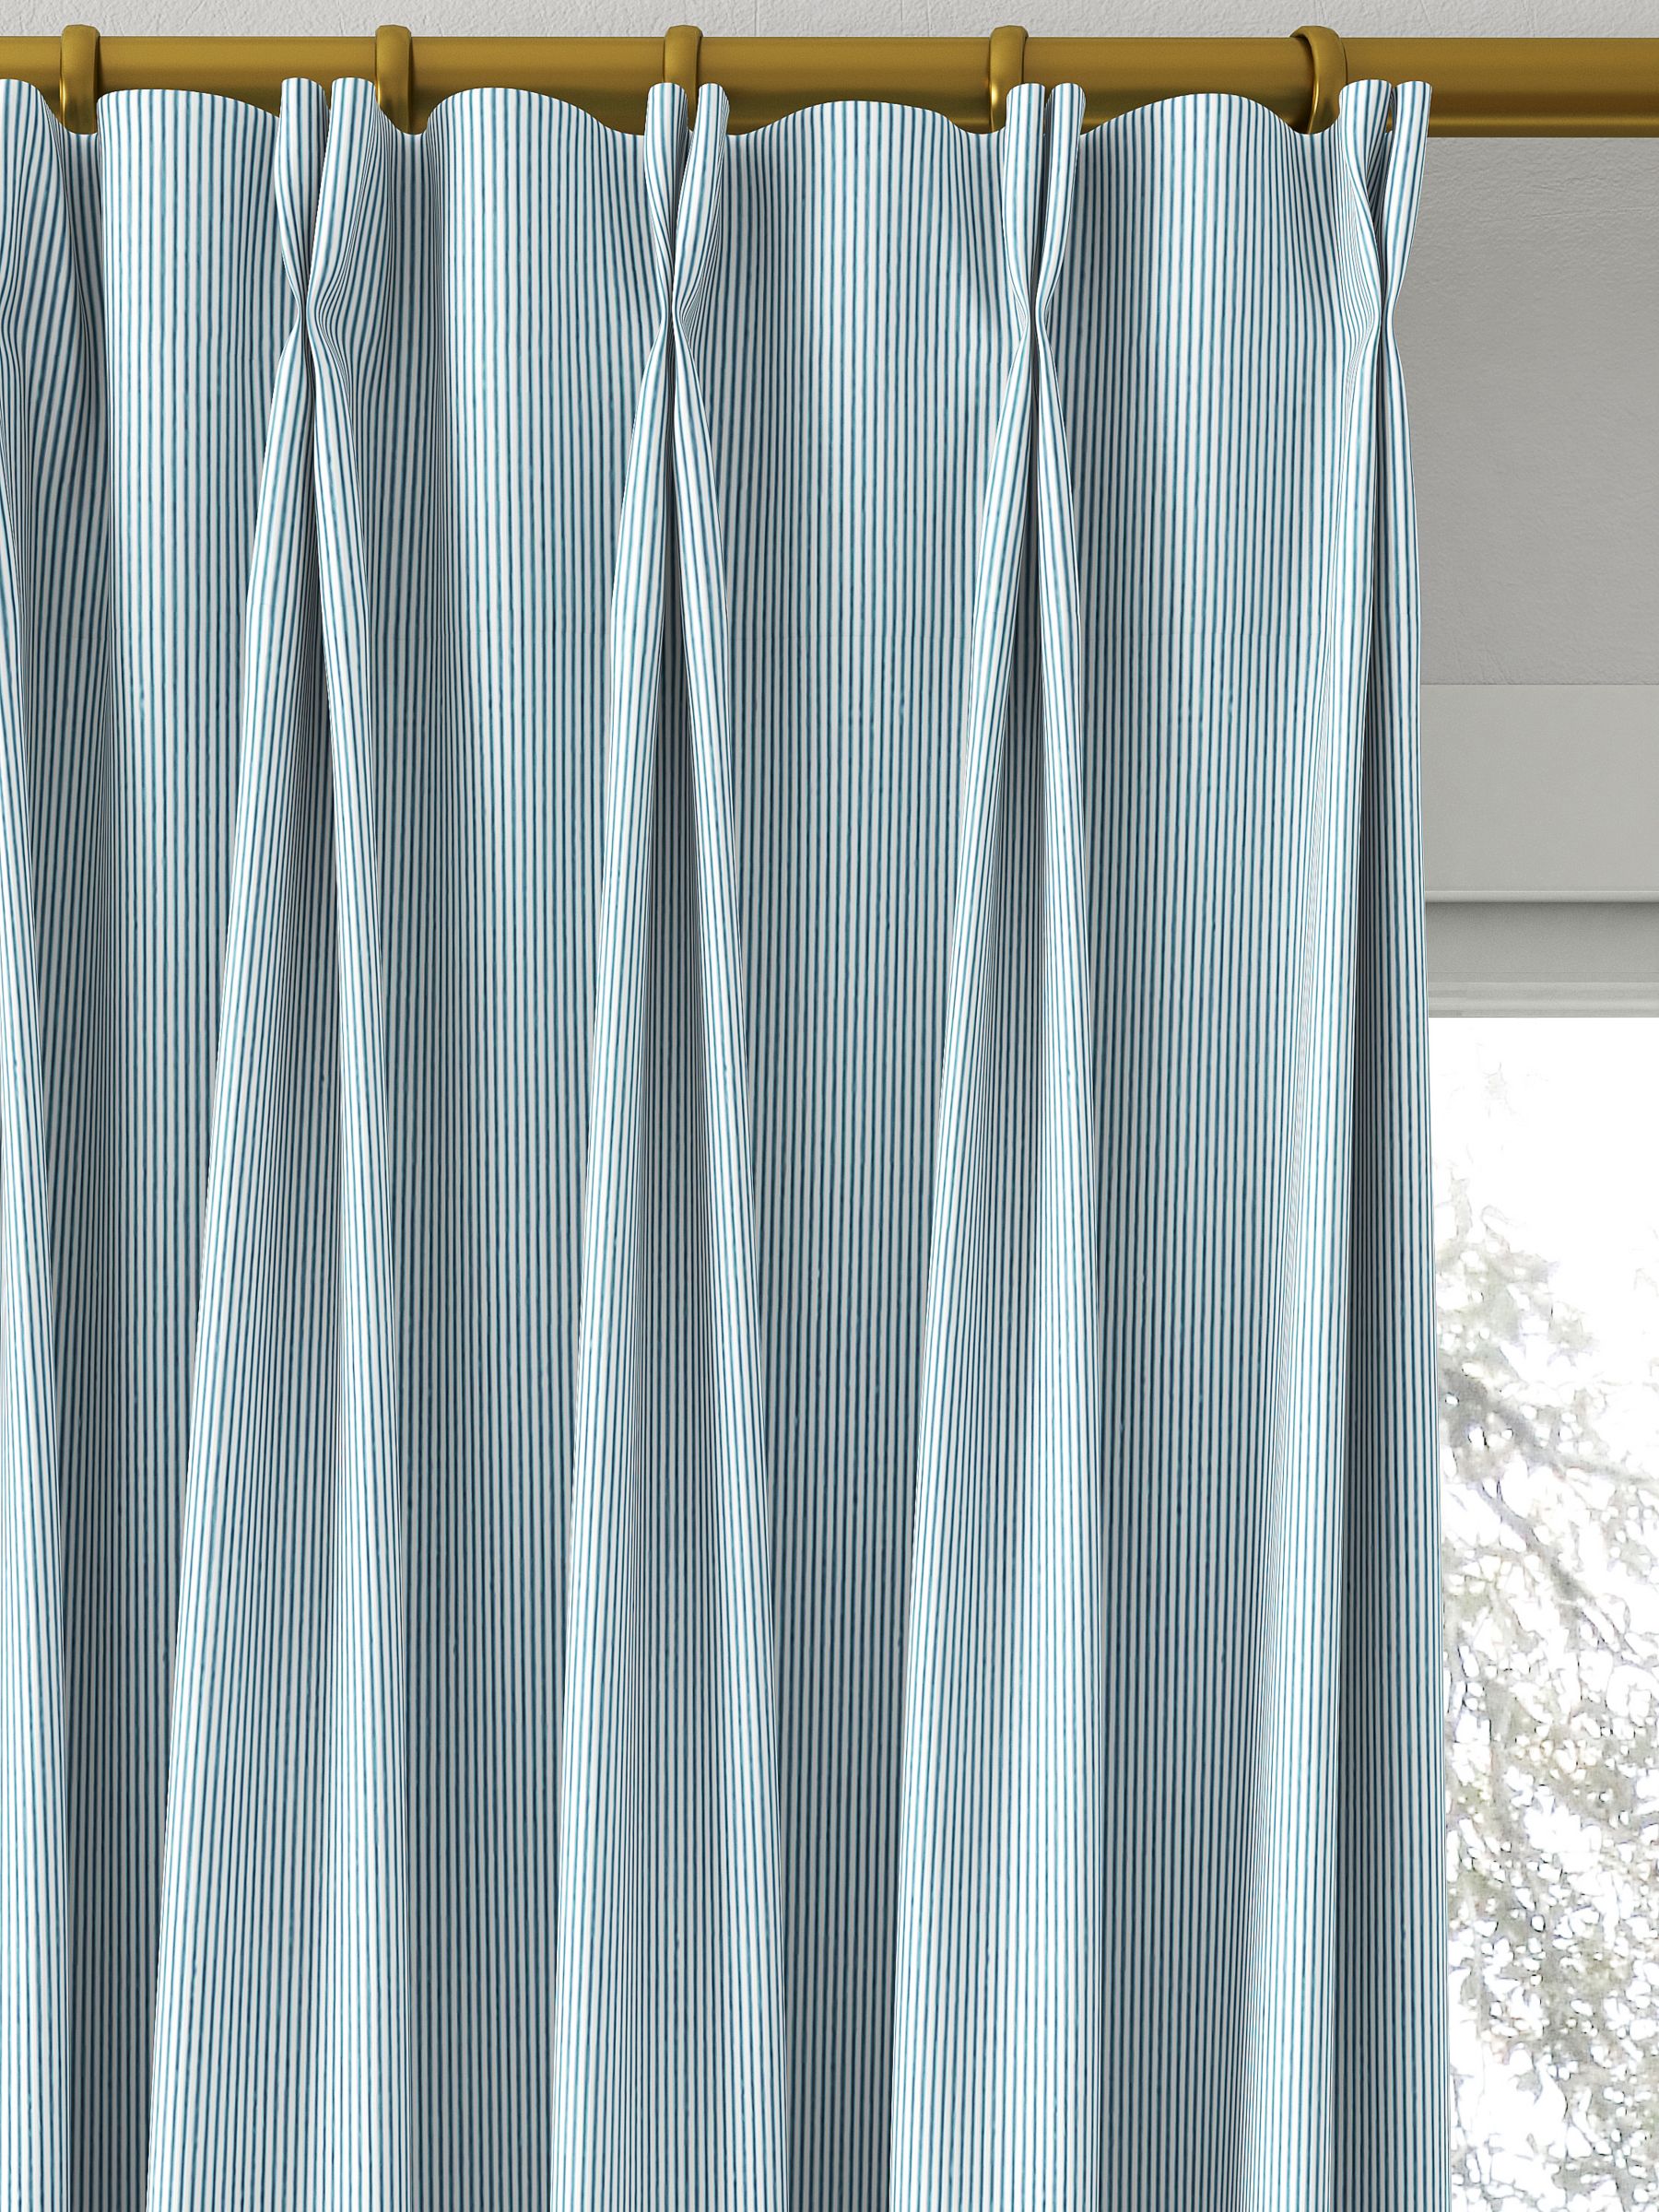 Clarke & Clarke Breton Made to Measure Curtains, Chambray